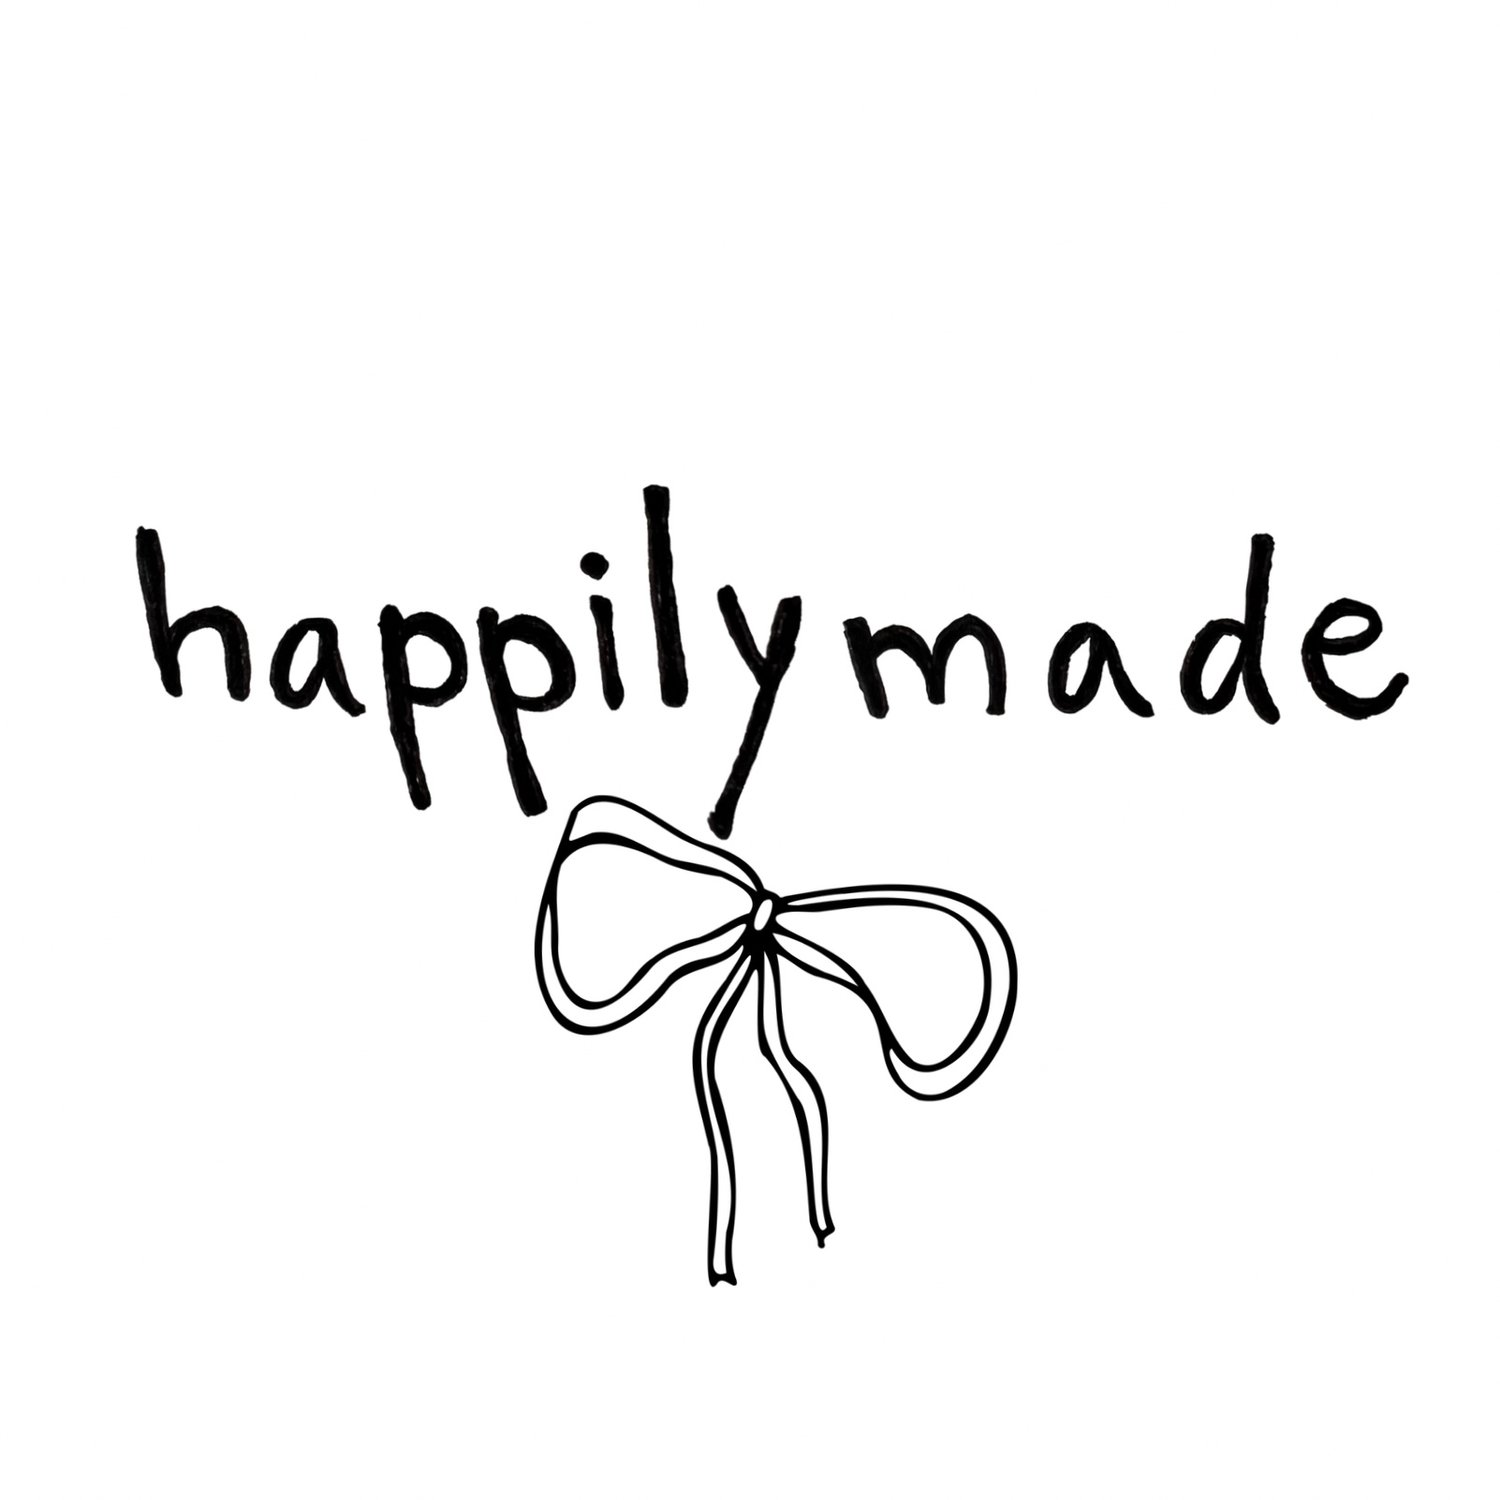 happily made